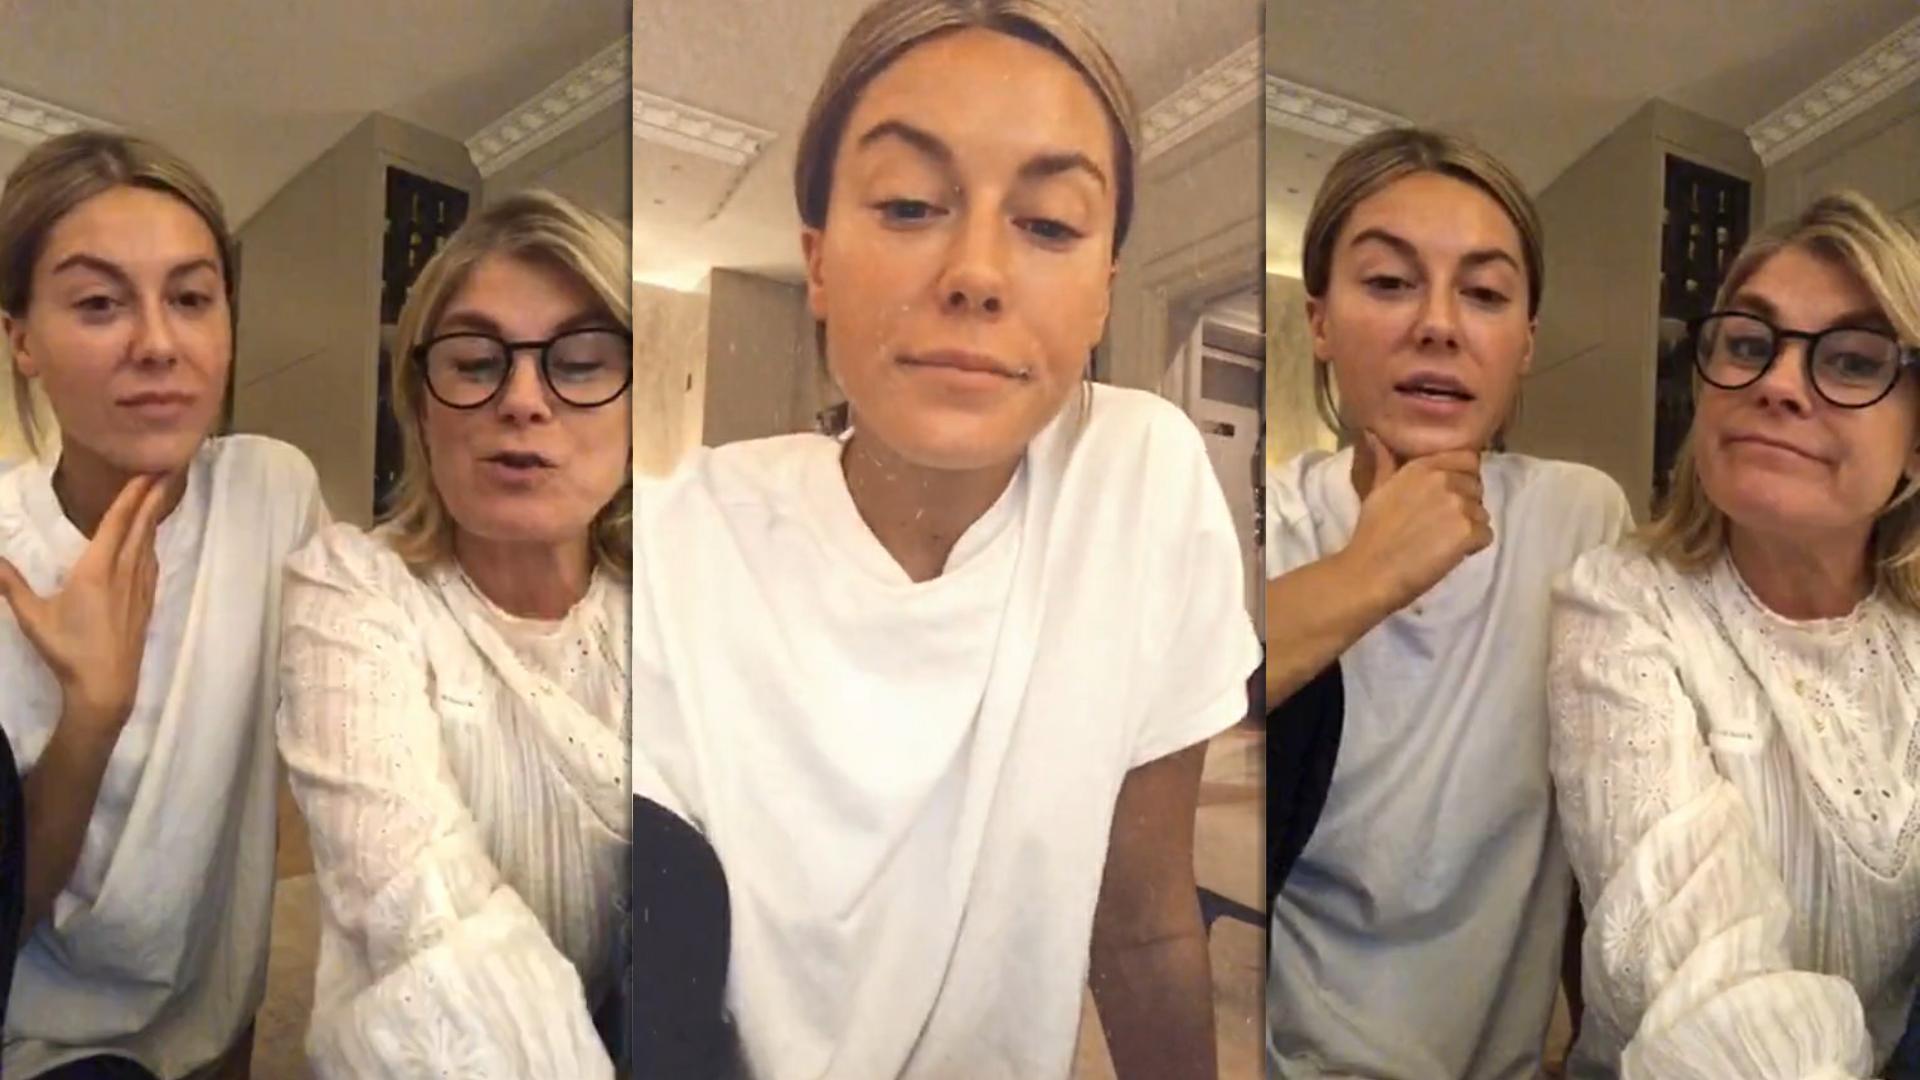 Bianca Wahlgren Ingrosso's Instagram Live Stream from May 24th 2020.